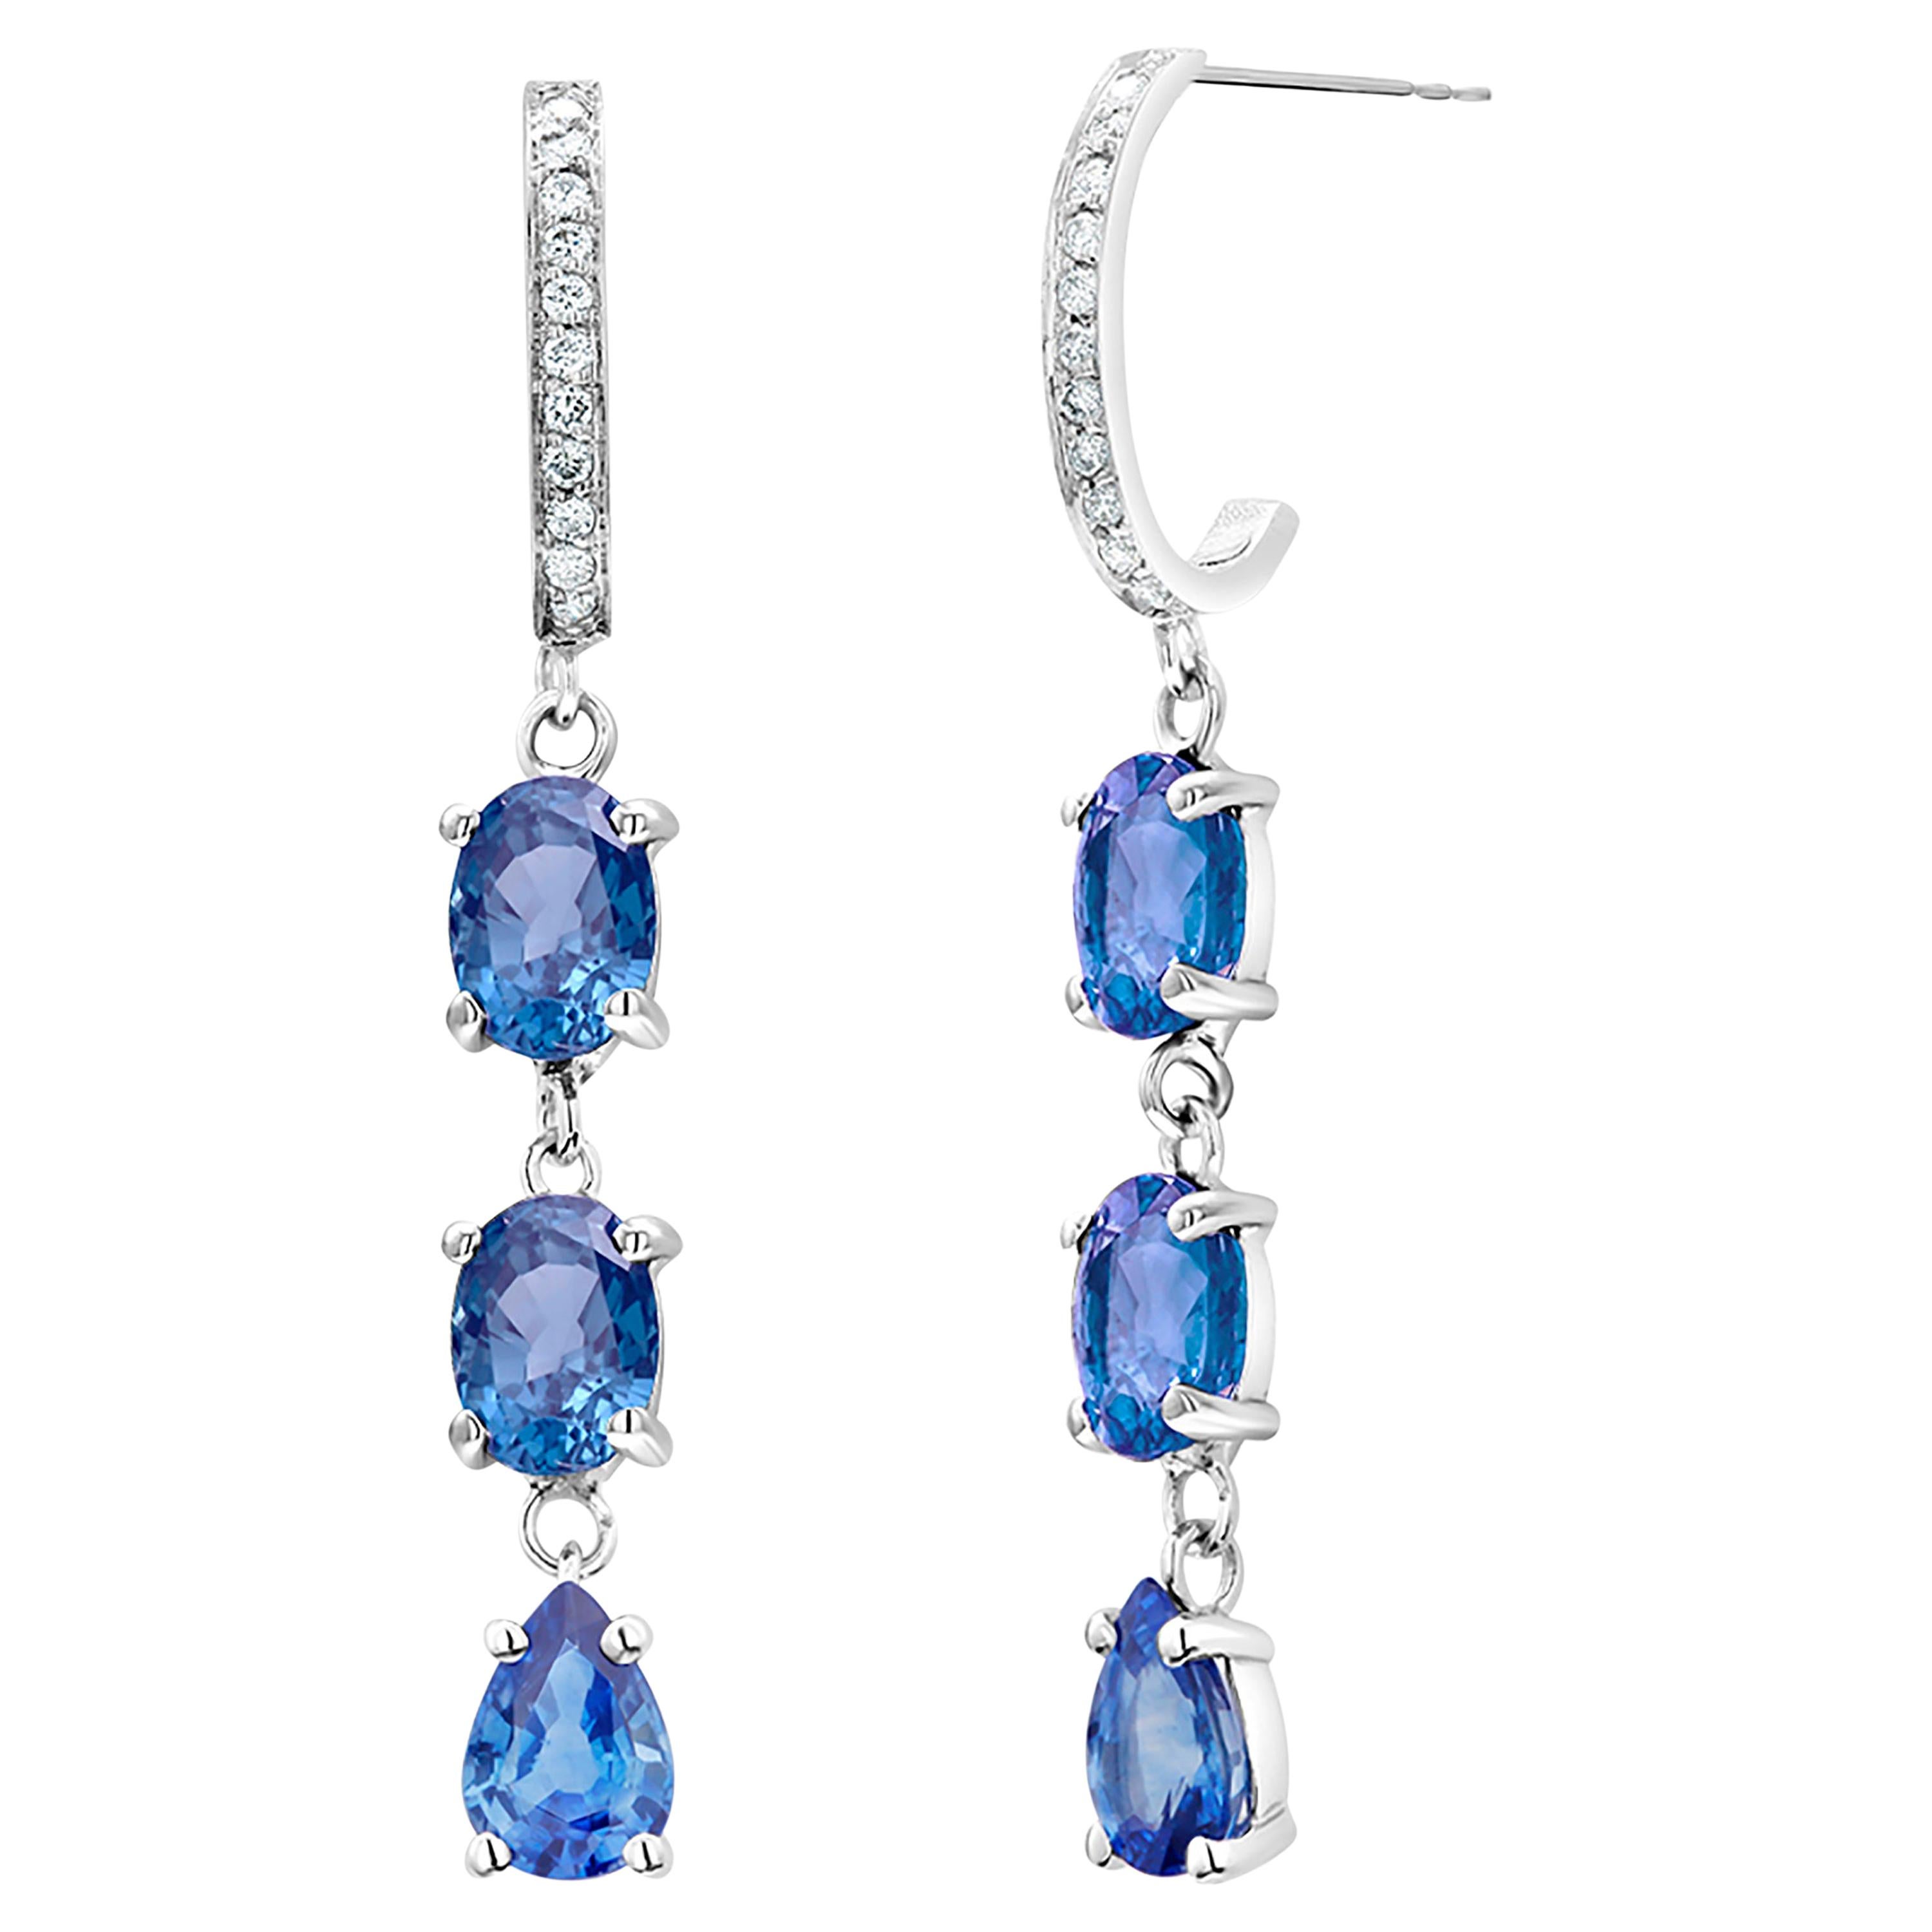 Triple Tiered Ceylon Blue Sapphires and Diamonds White Gold Drop Hoop Earrings